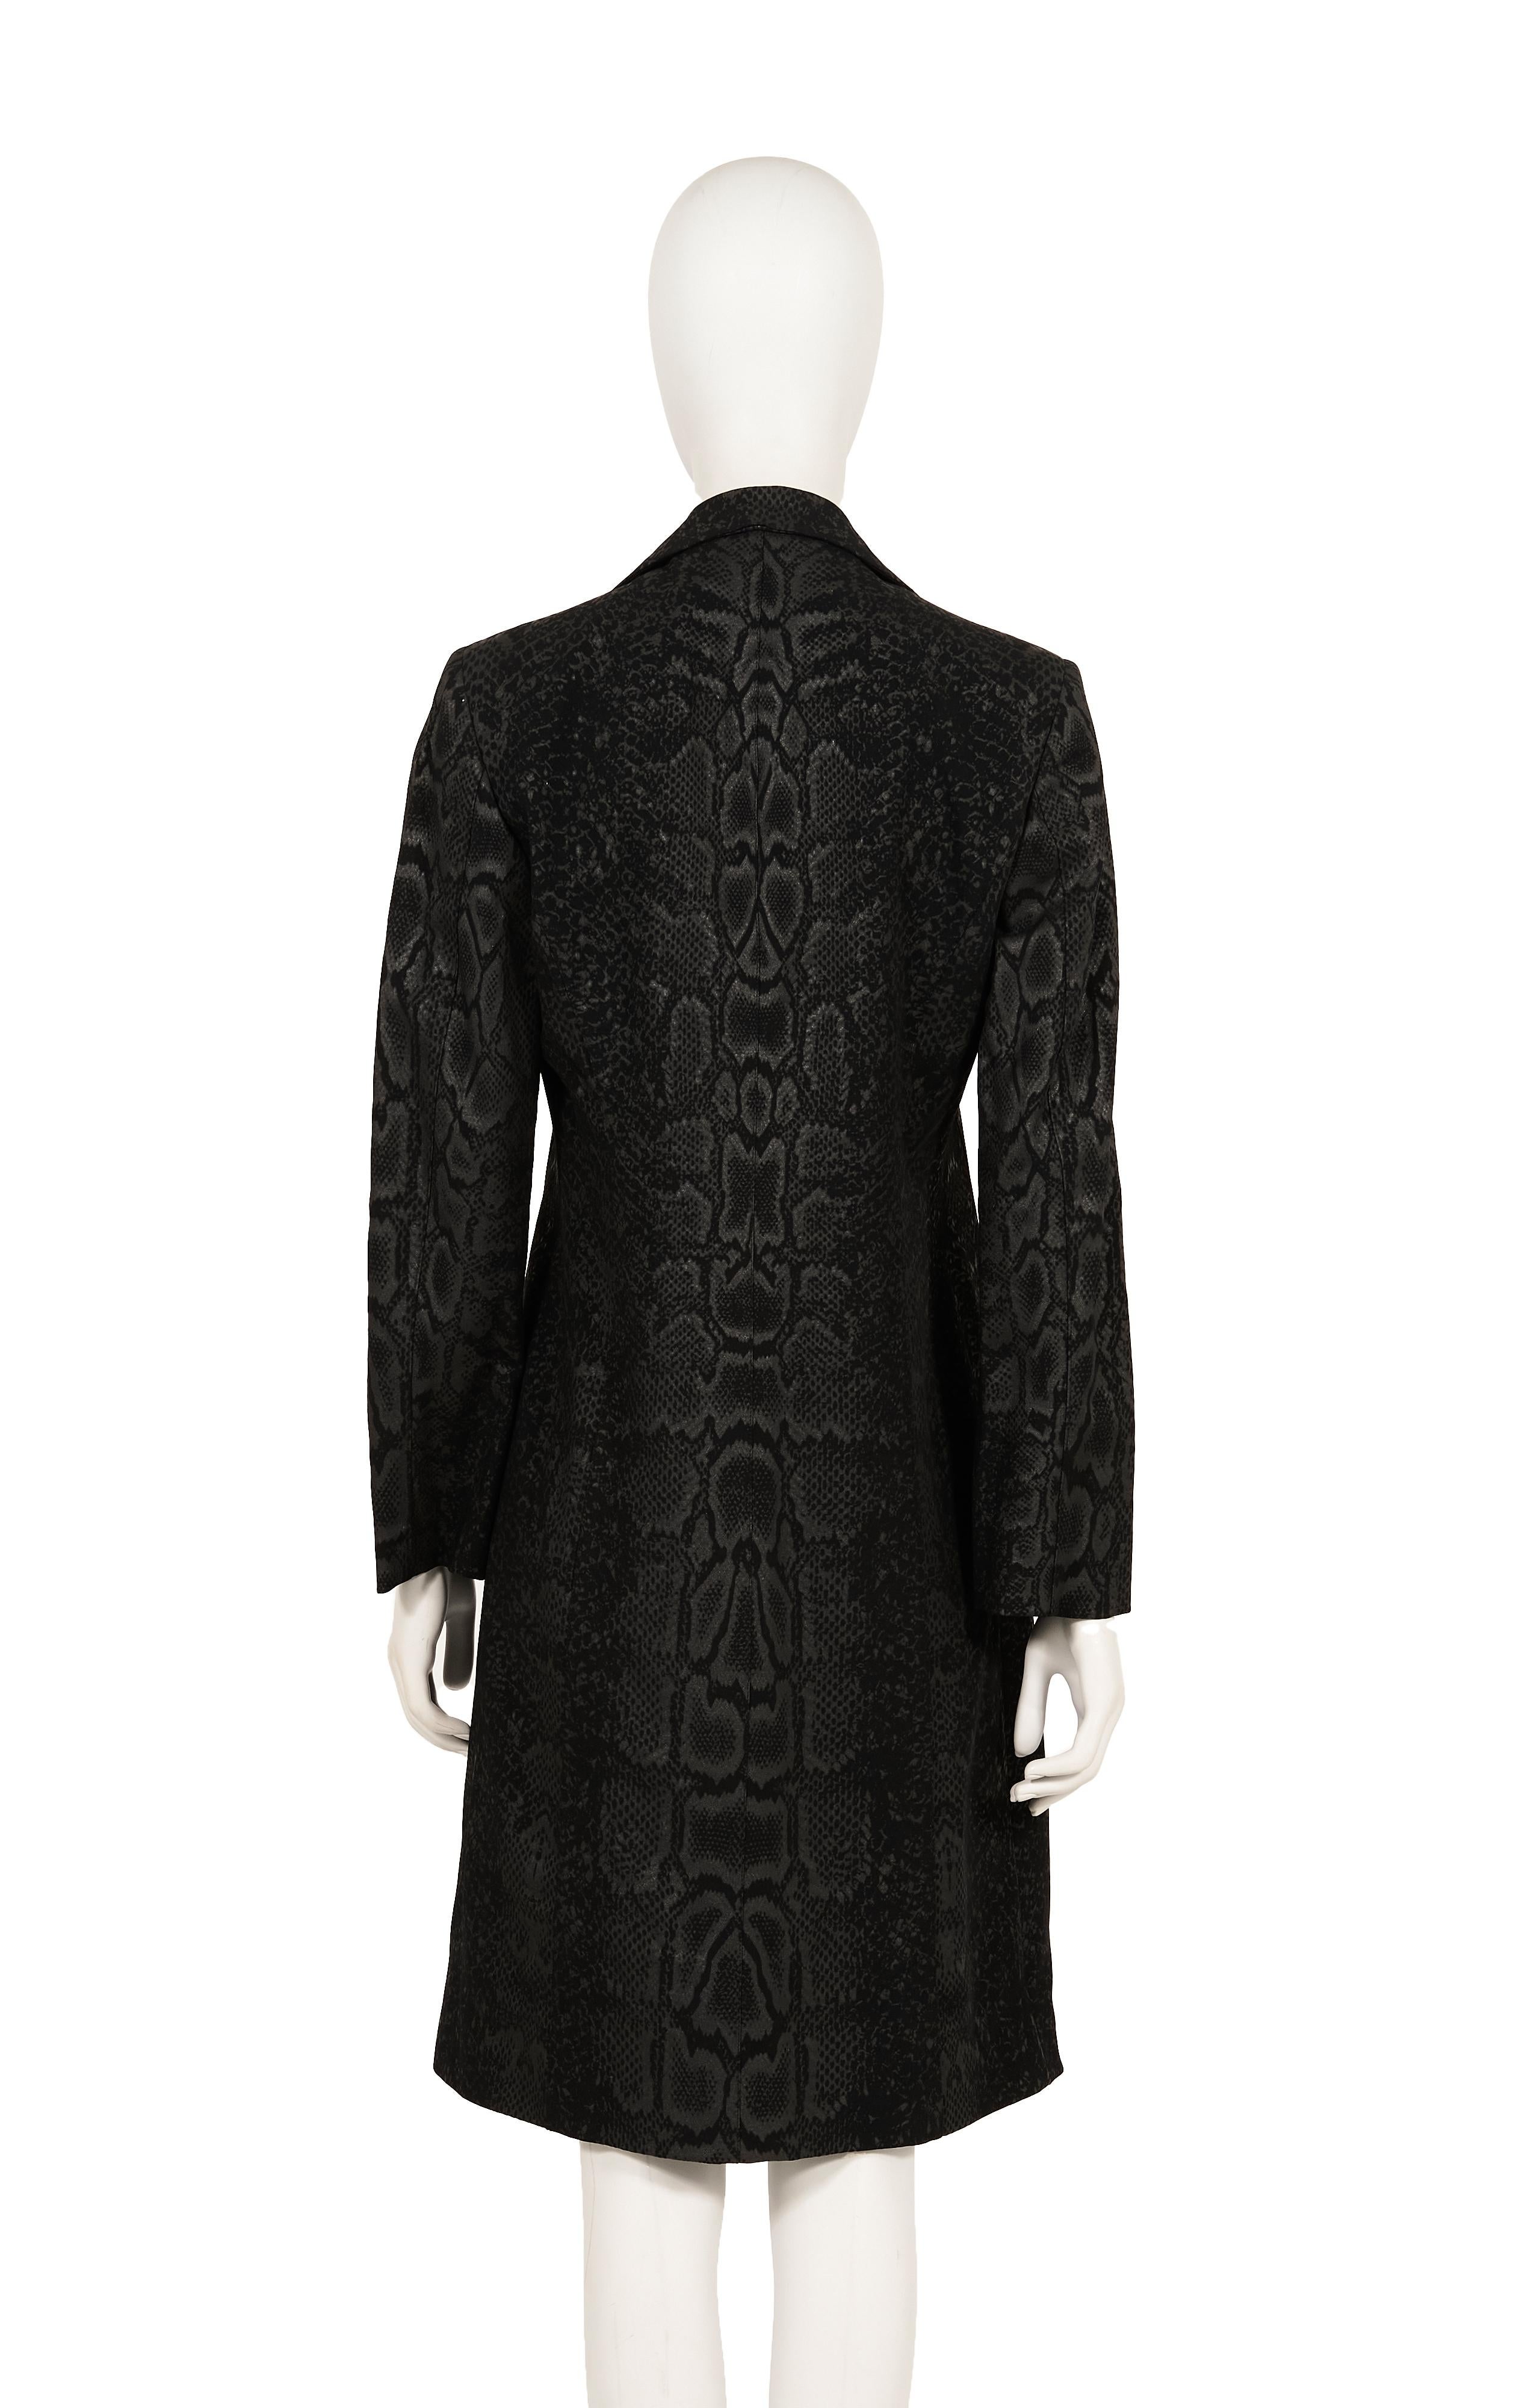 Roberto Cavalli F/W 1998 black Snakeskin reflective print trench coat In Excellent Condition For Sale In Rome, IT